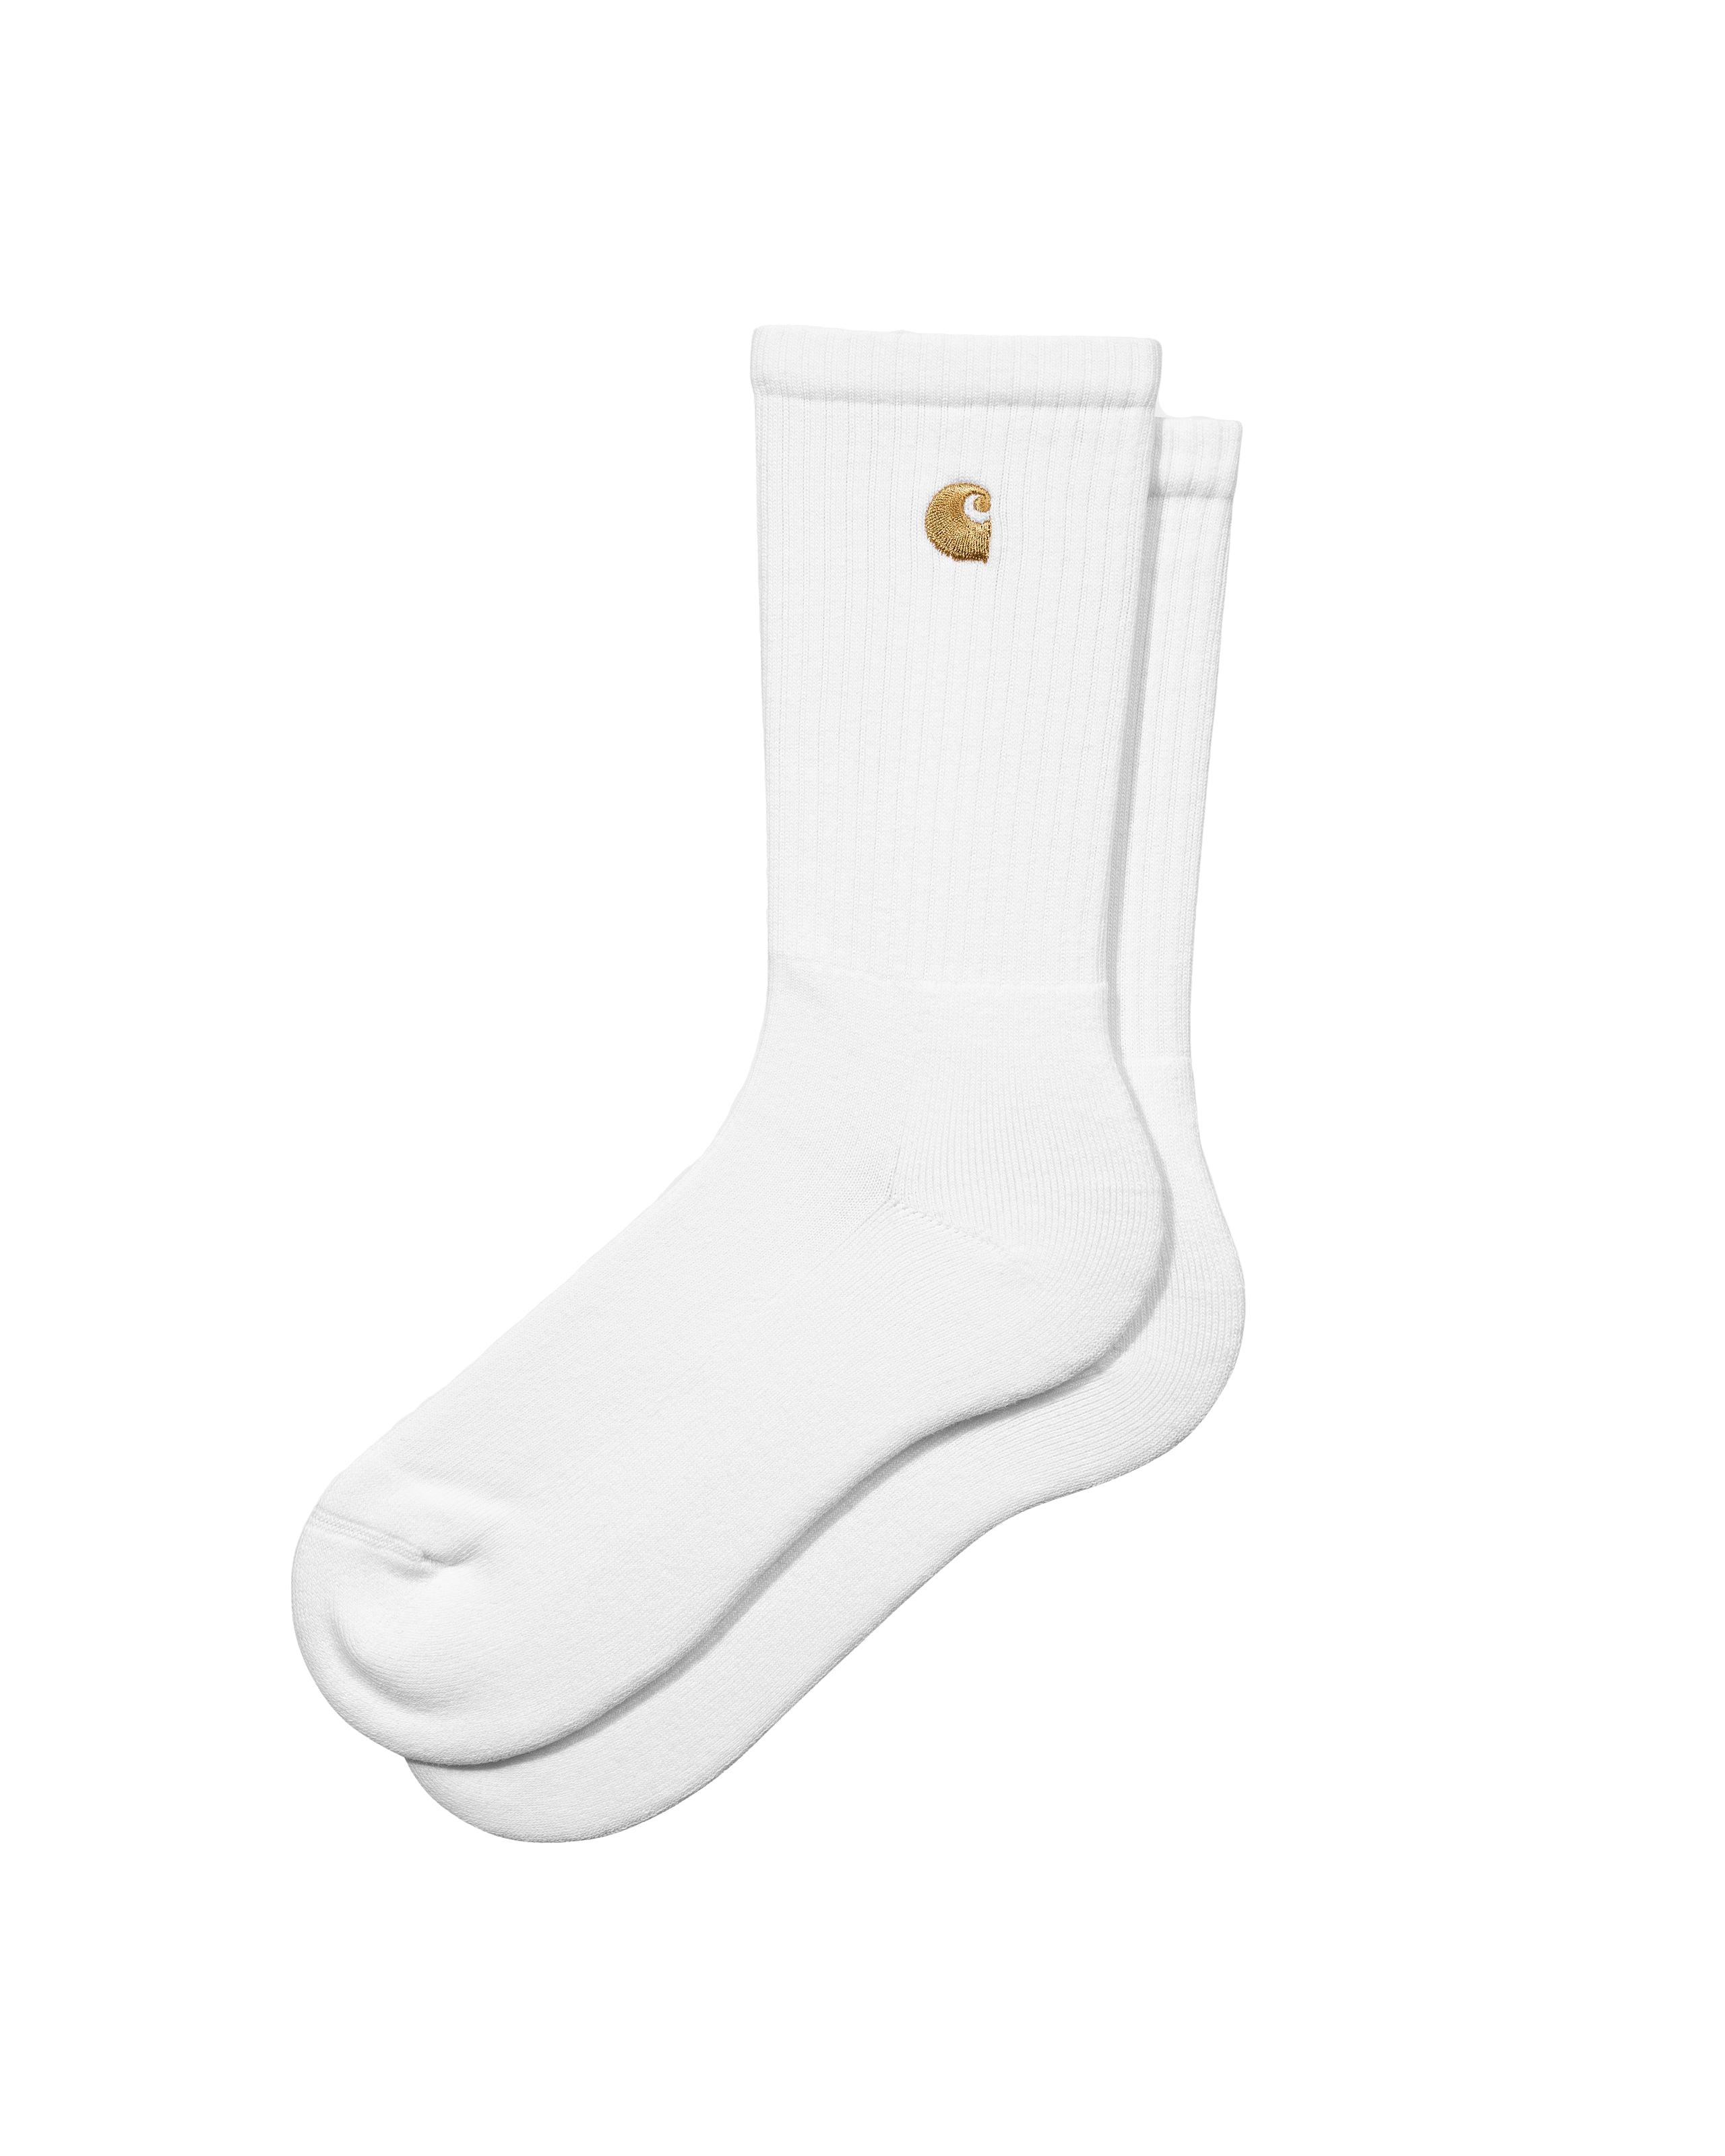 Calcetines Chase - White/Gold